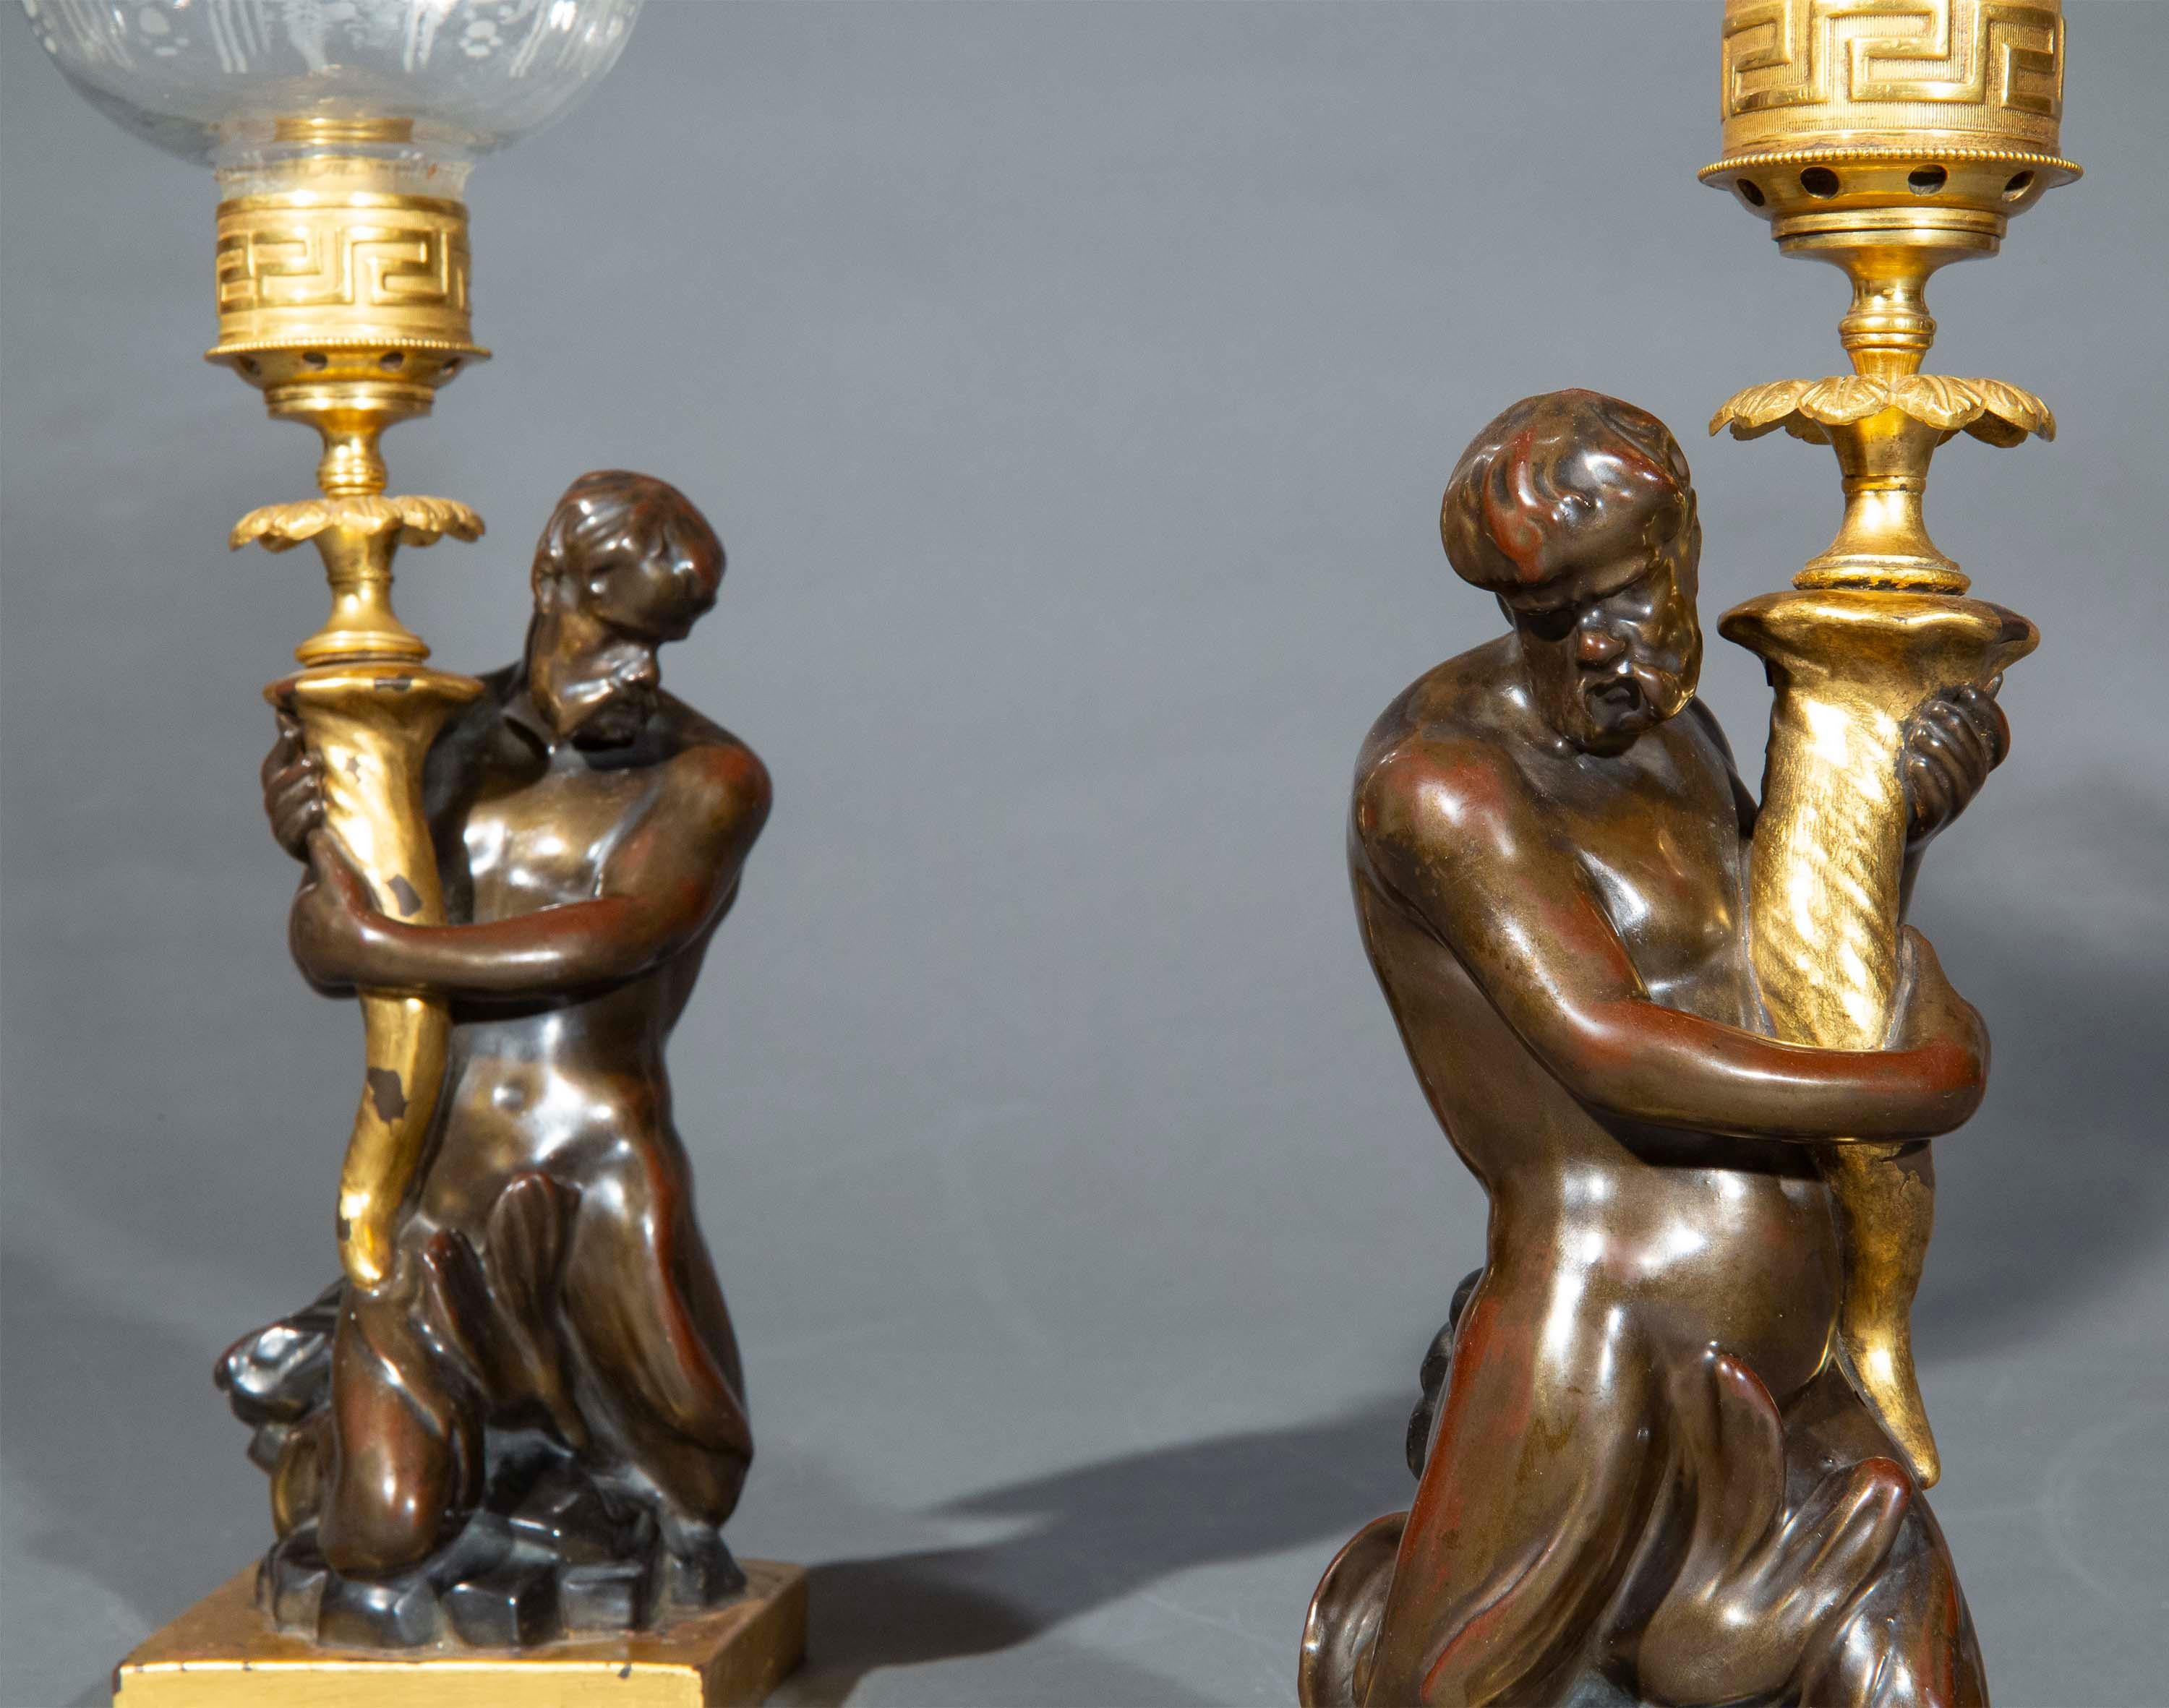 English Pair of Early 19th Century Triton Candlesticks Storm Lanterns by Wood & Caldwell For Sale